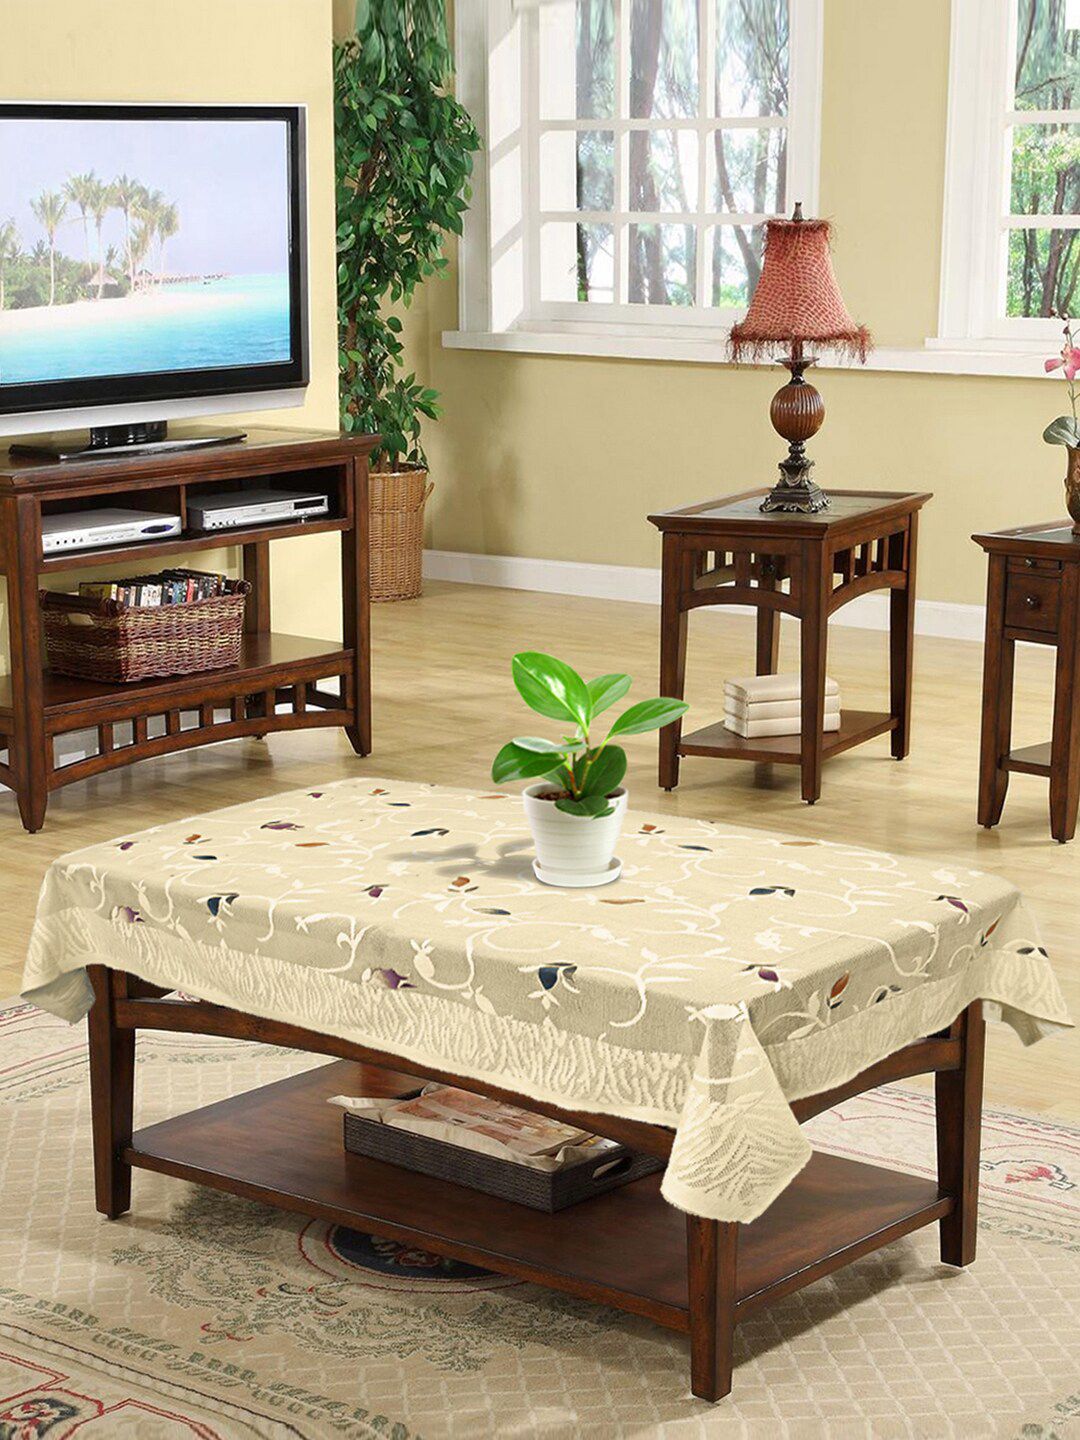 Kuber Industries Cream-Coloured & Blue Leaf Printed 4-Seater Rectangle Cotton Table Cover Price in India